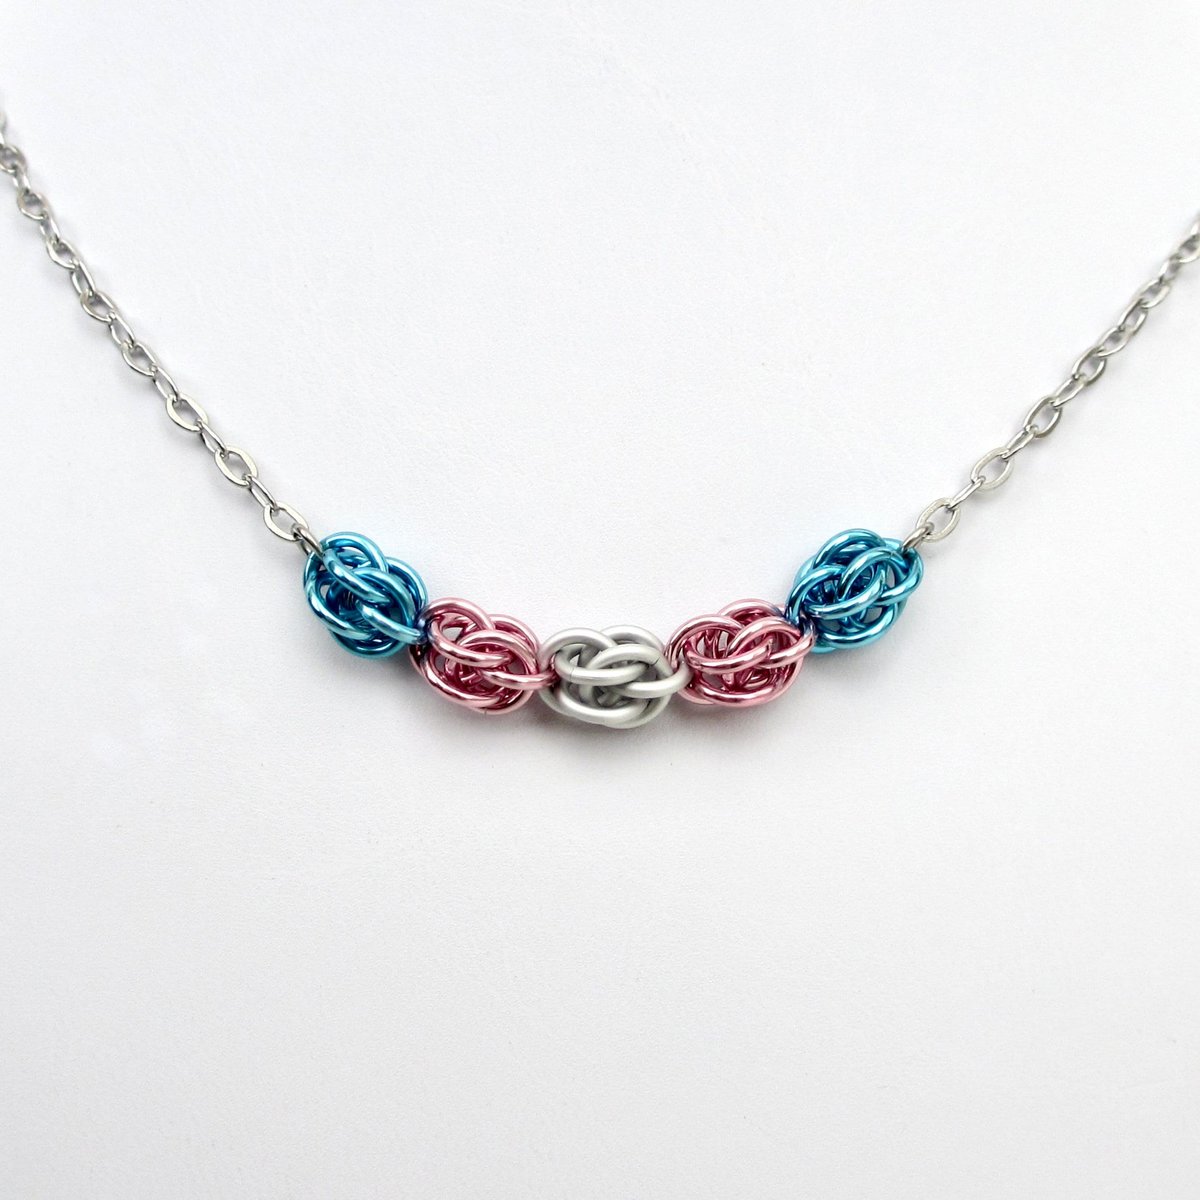 Transgender pride necklace, chainmail Sweetpea weave LGBTQ jewelry